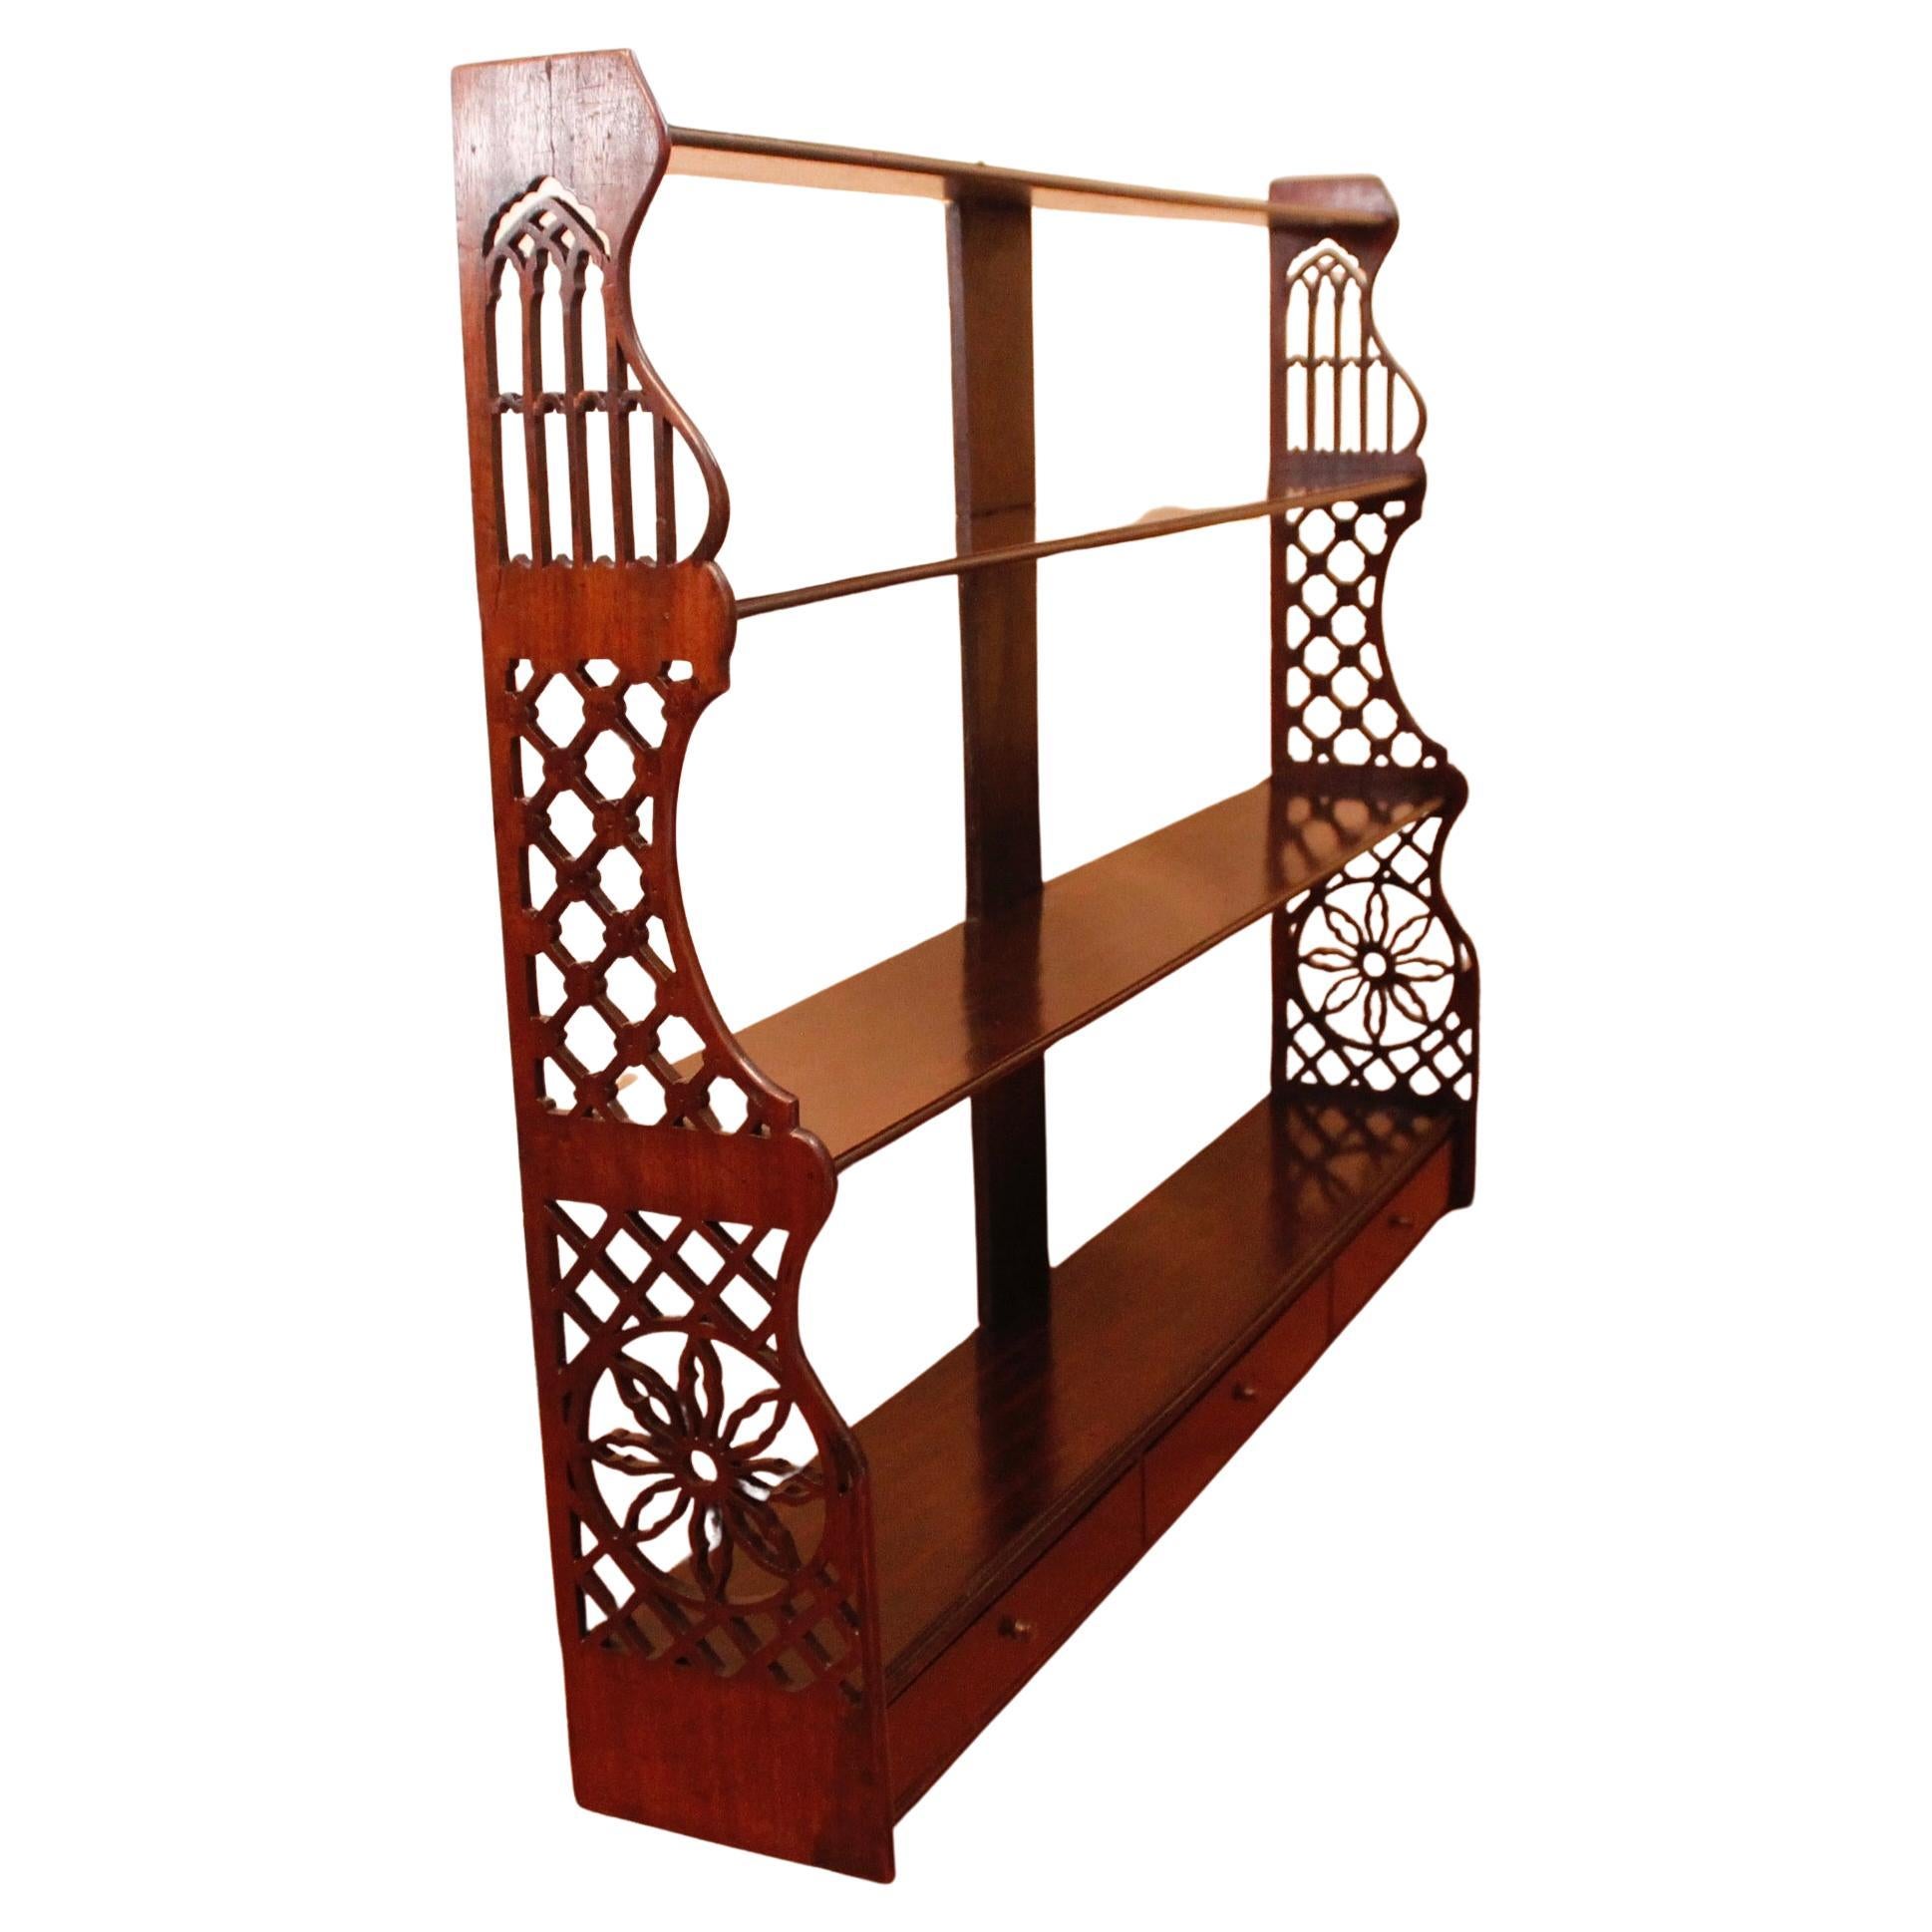 Large George III Period Chinese Chippendale Mahogany Fretwork Hanging Shelf For Sale